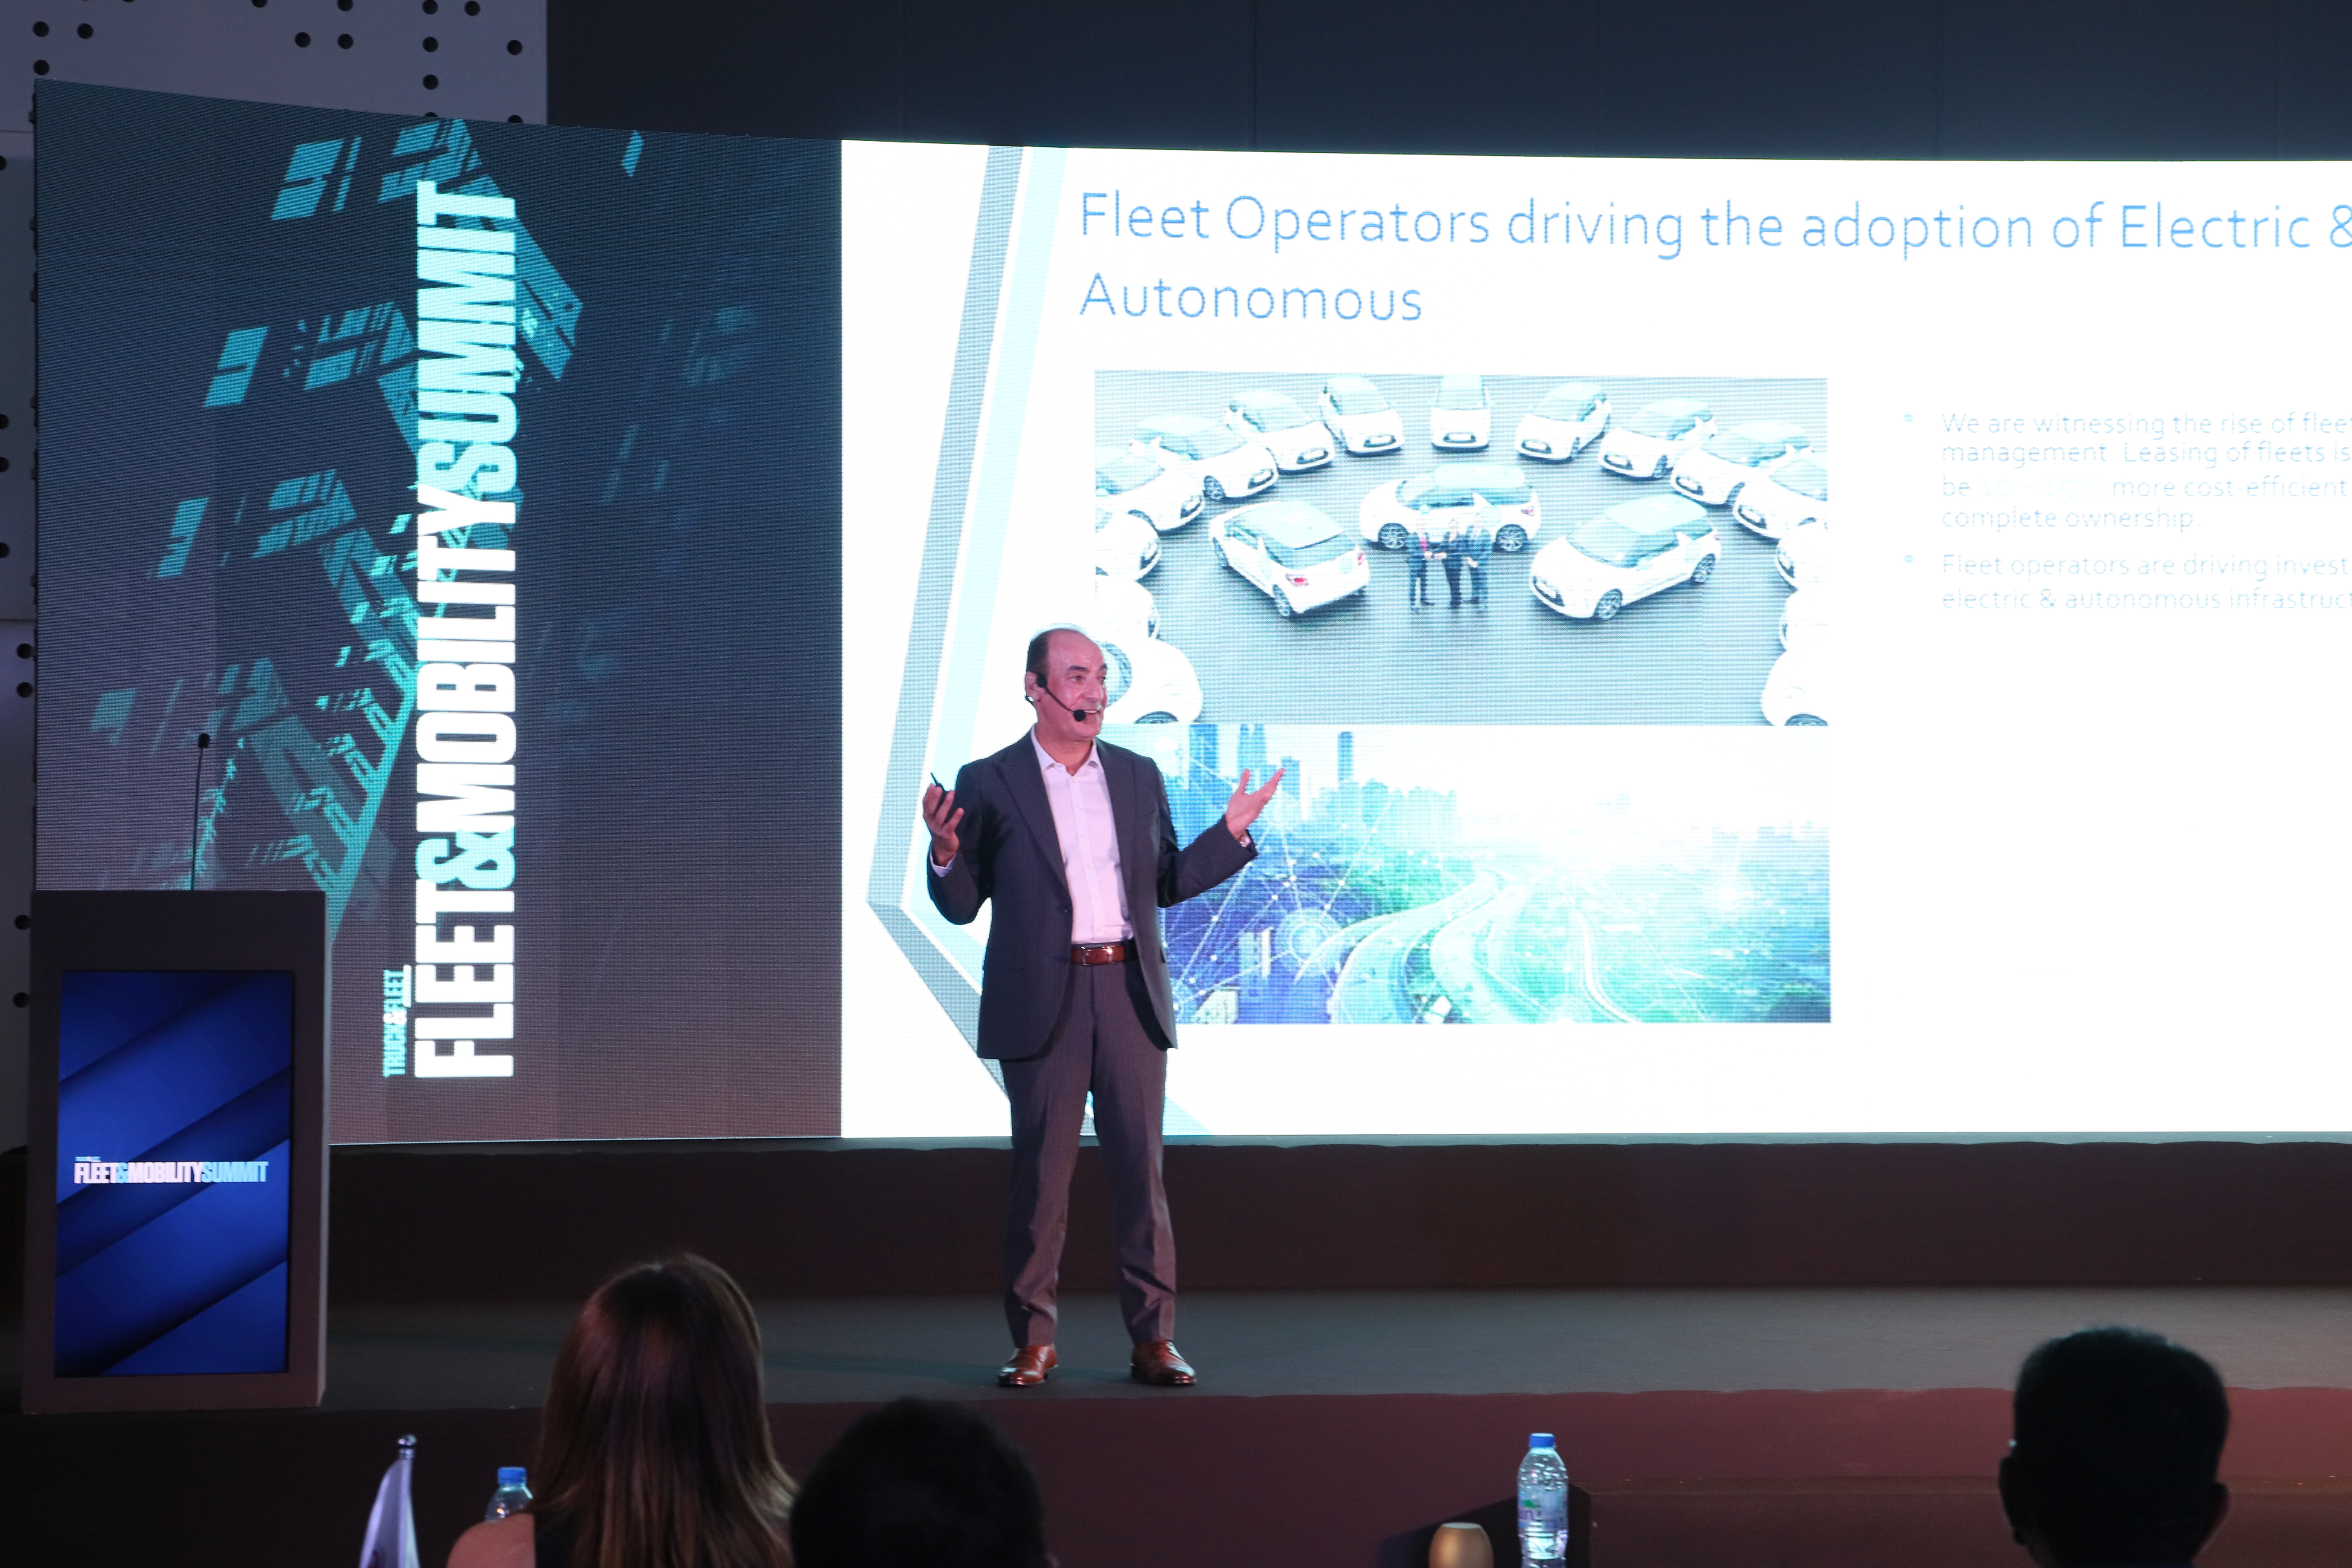 Irfan Tansel, CEO of Al Masaood Automobiles offers keynote speech at the Fleet & Mobility Summit on trends shaping the industry 